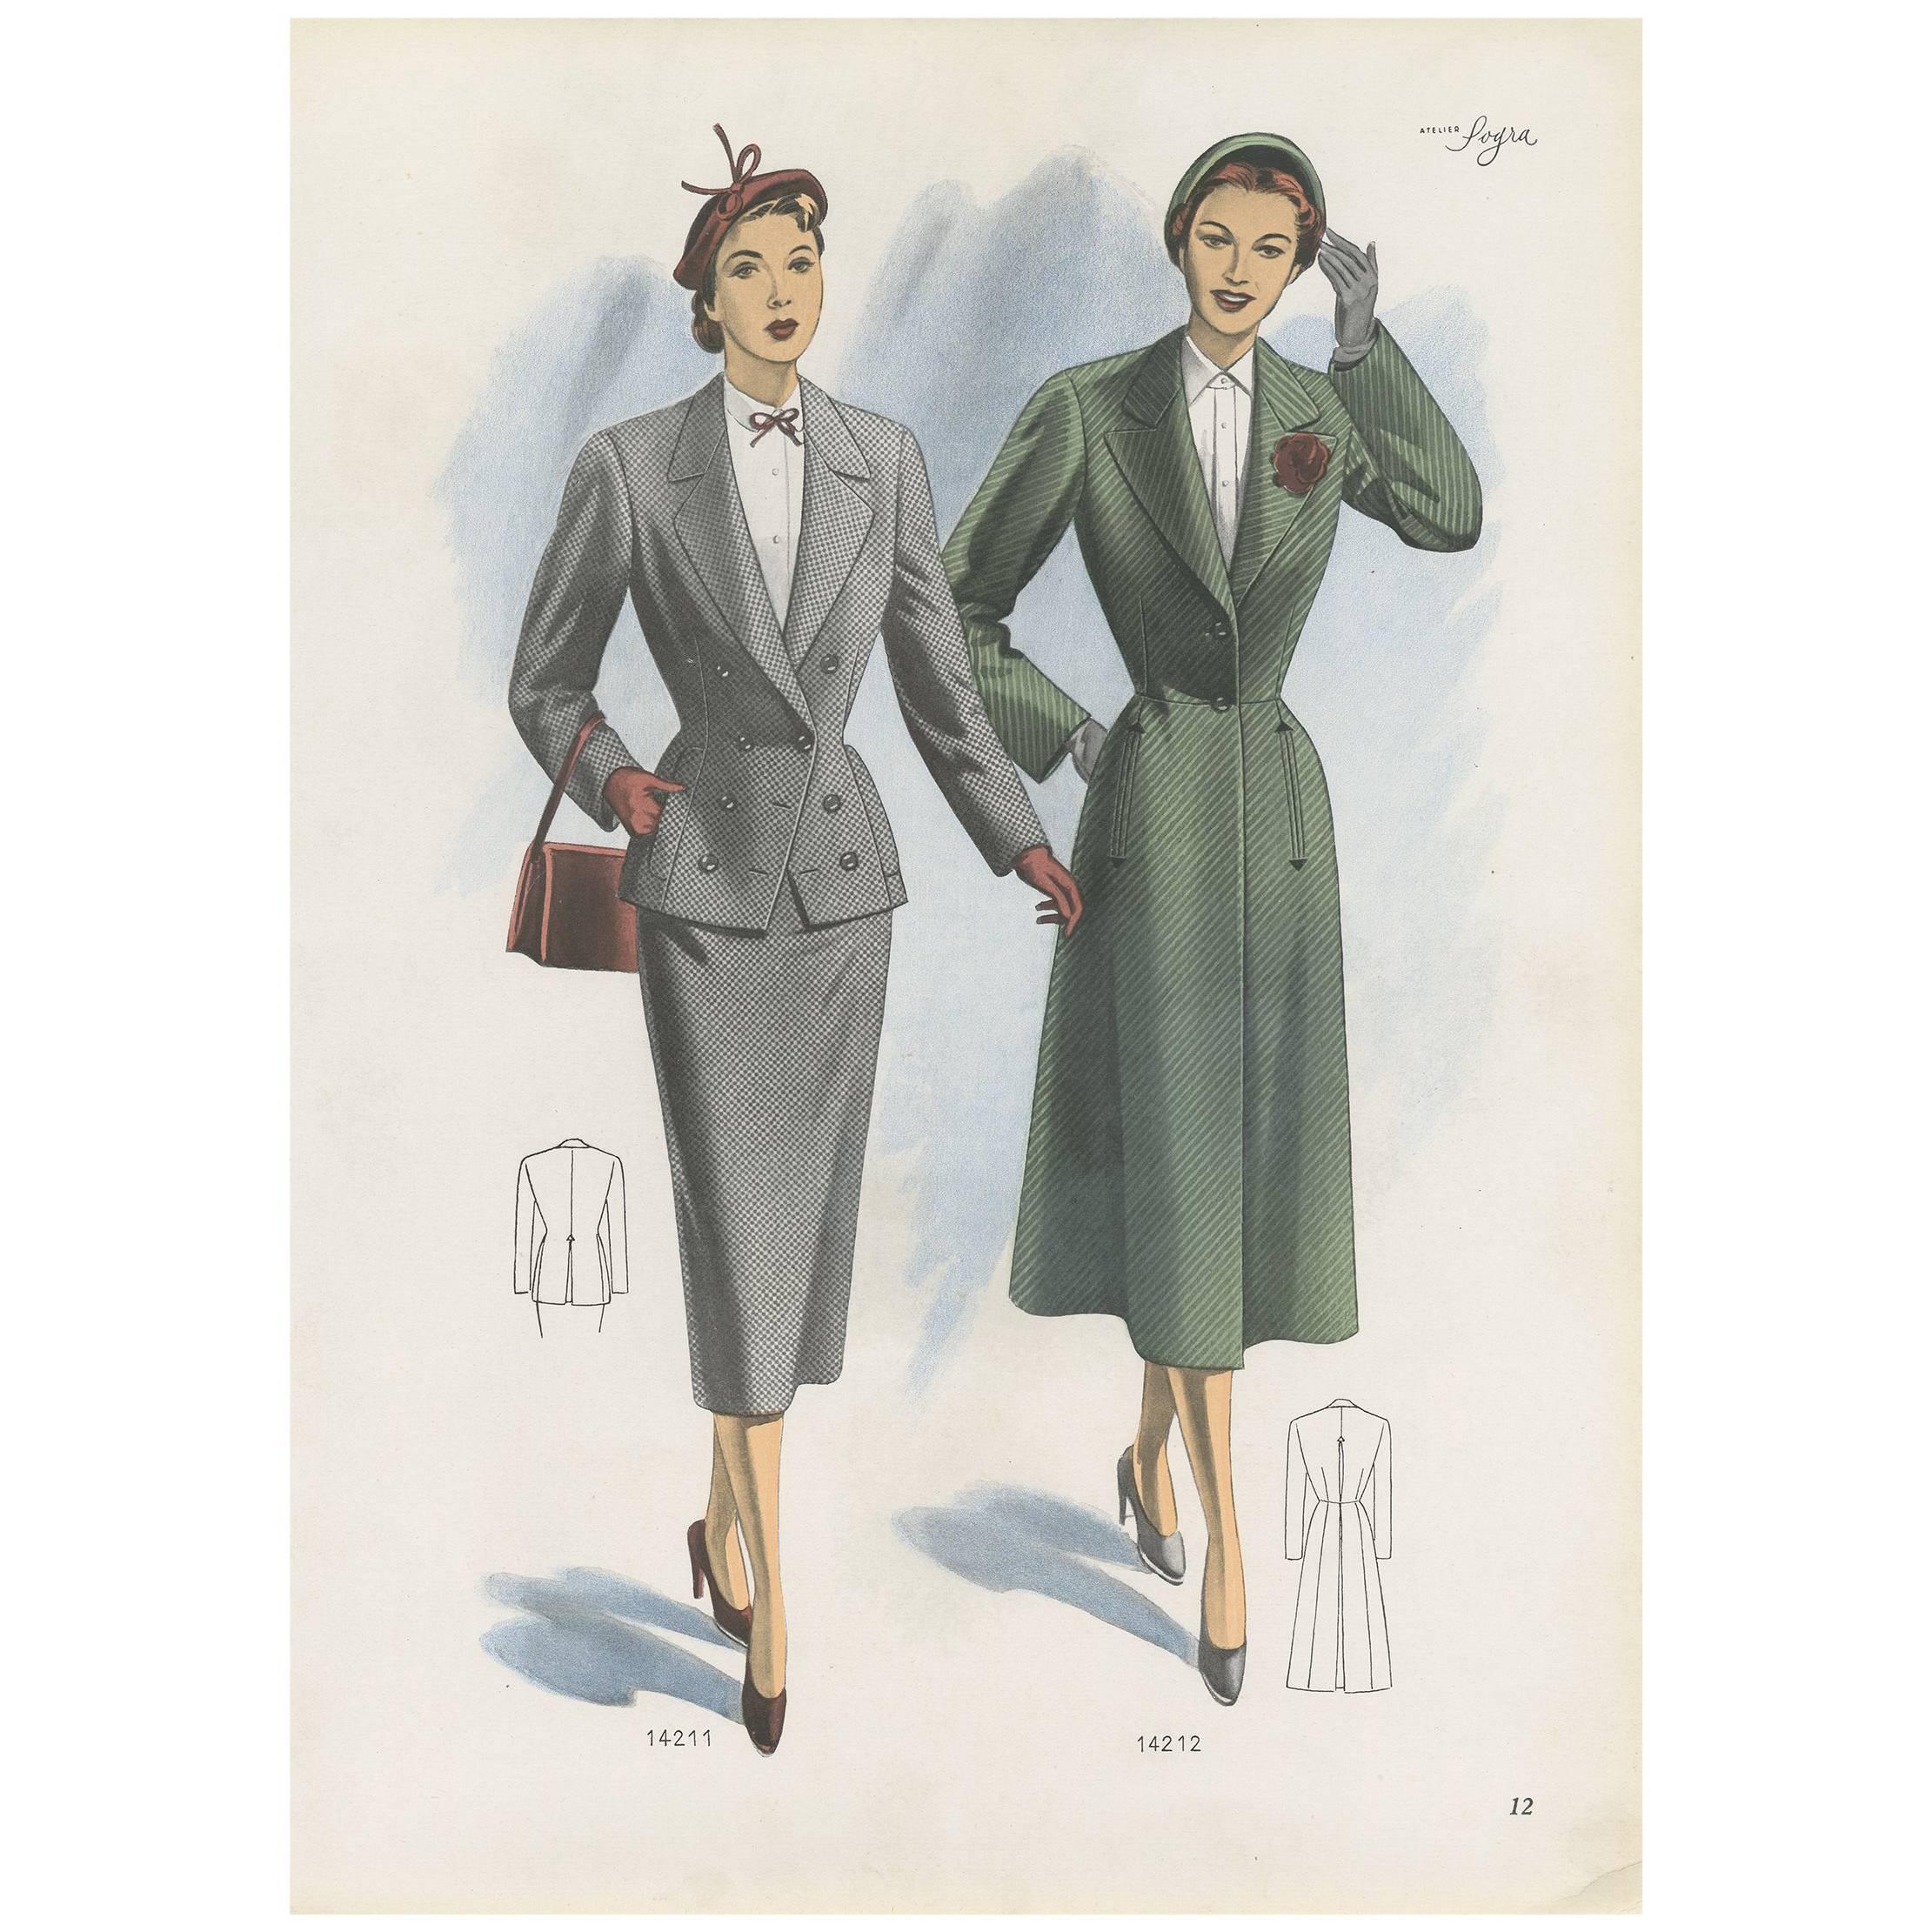 Vintage Fashion Print 'Pl. 14211' Published in Ladies Styles, 1951 For Sale